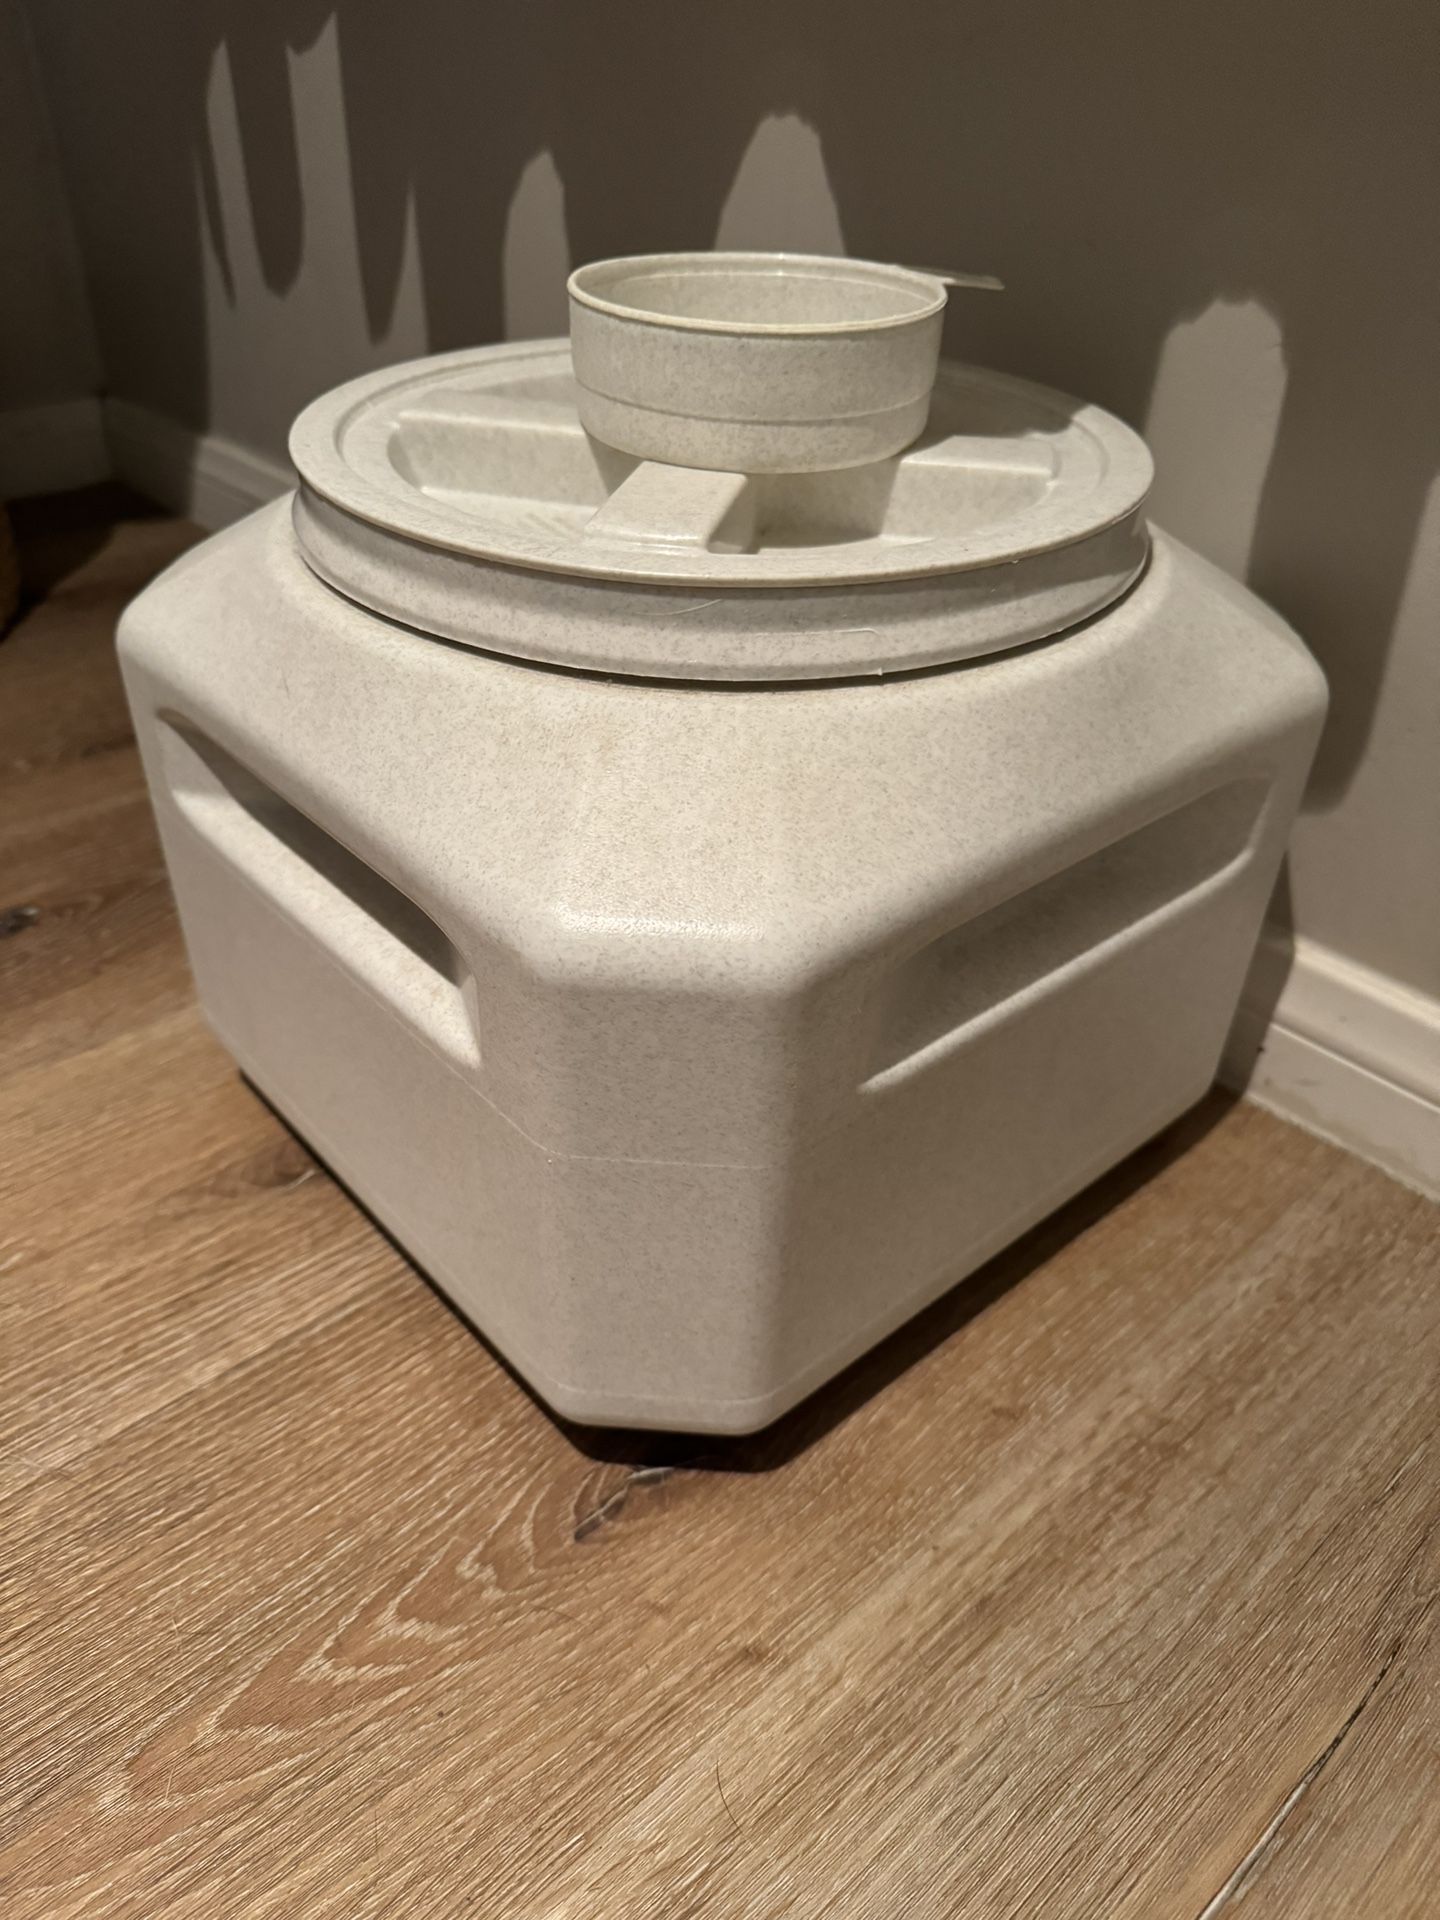 Dog Food container